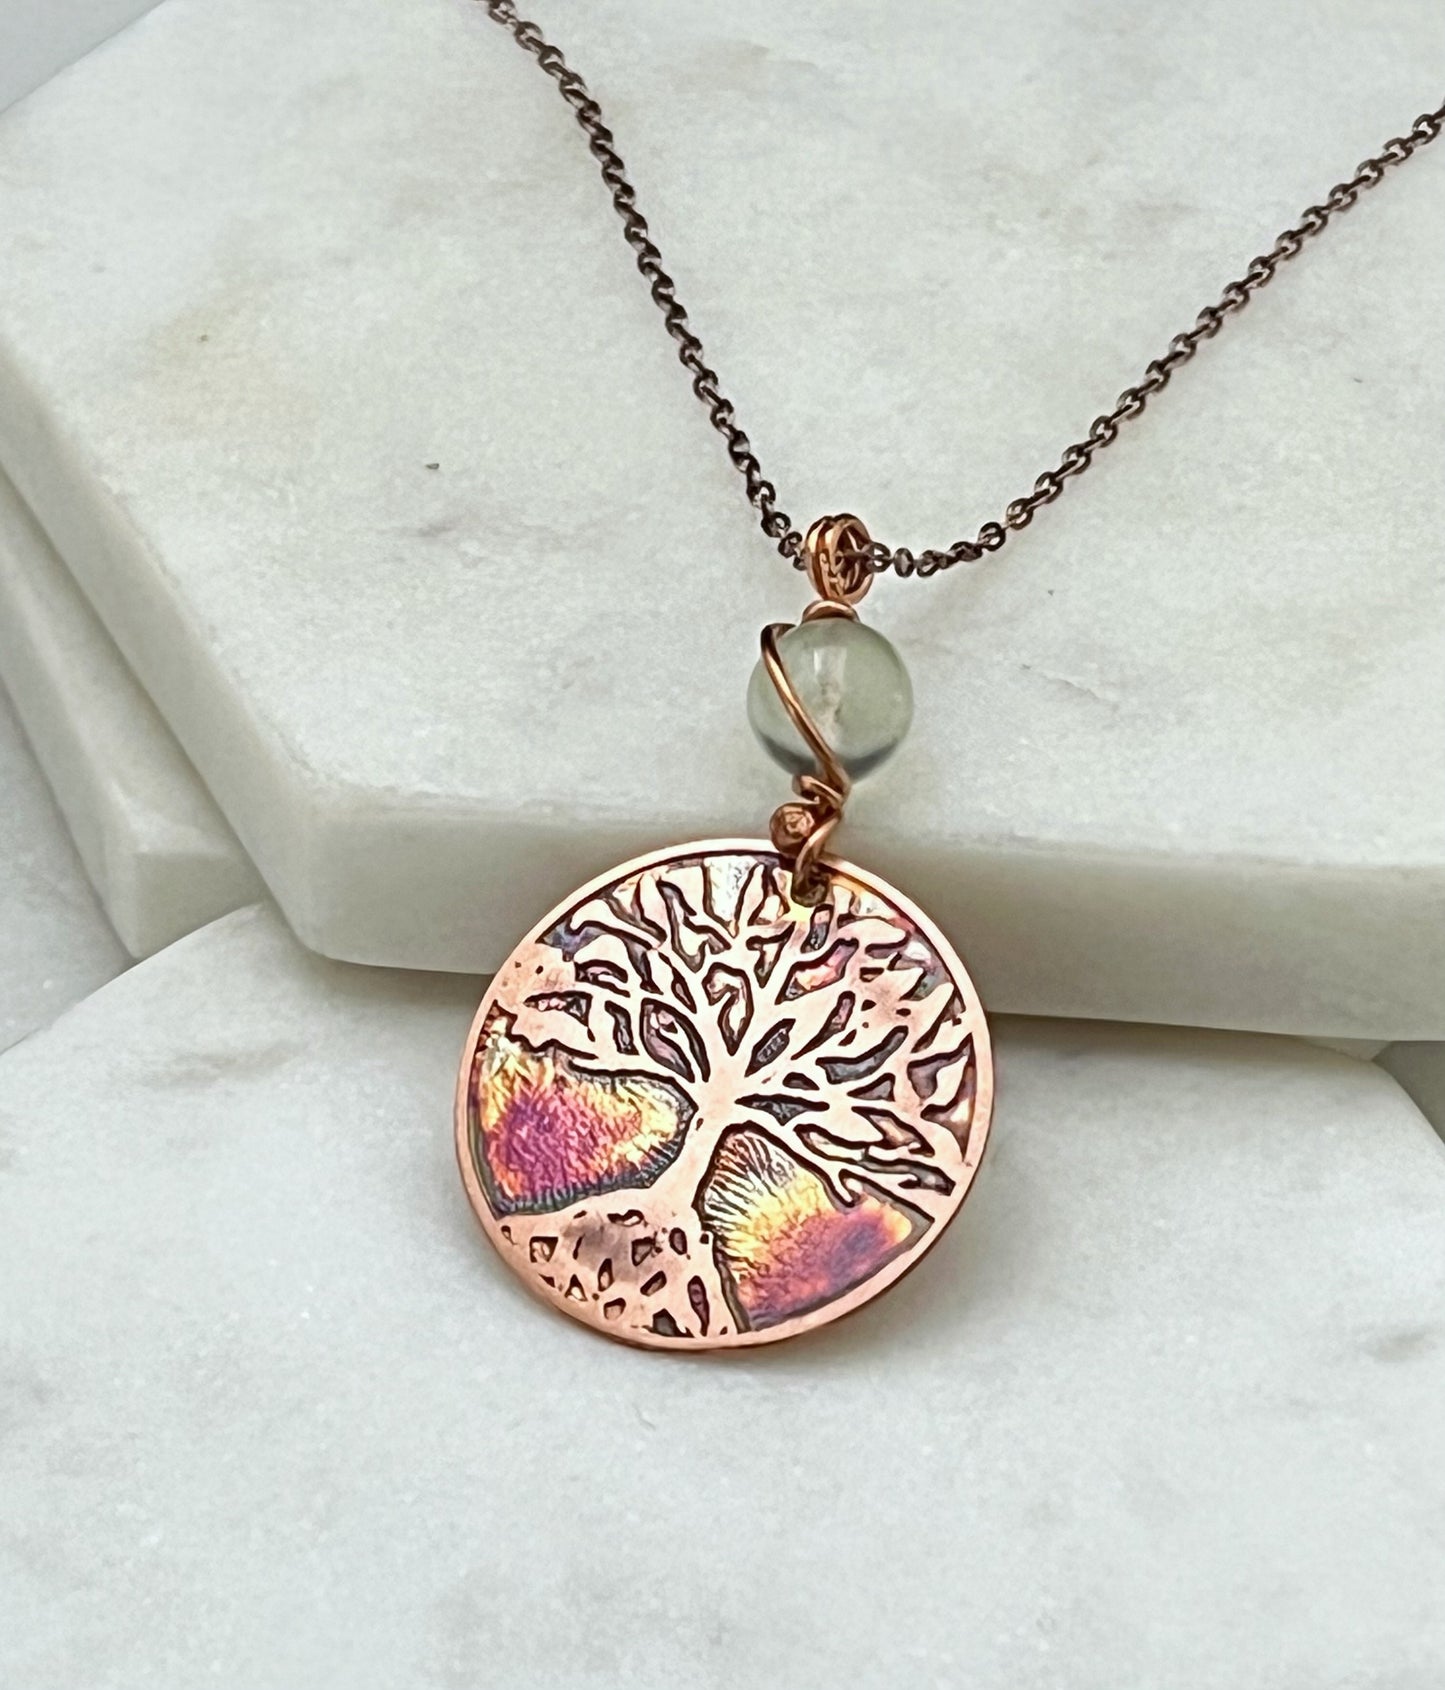 Acid etched copper tree necklace with prehnite gemstone